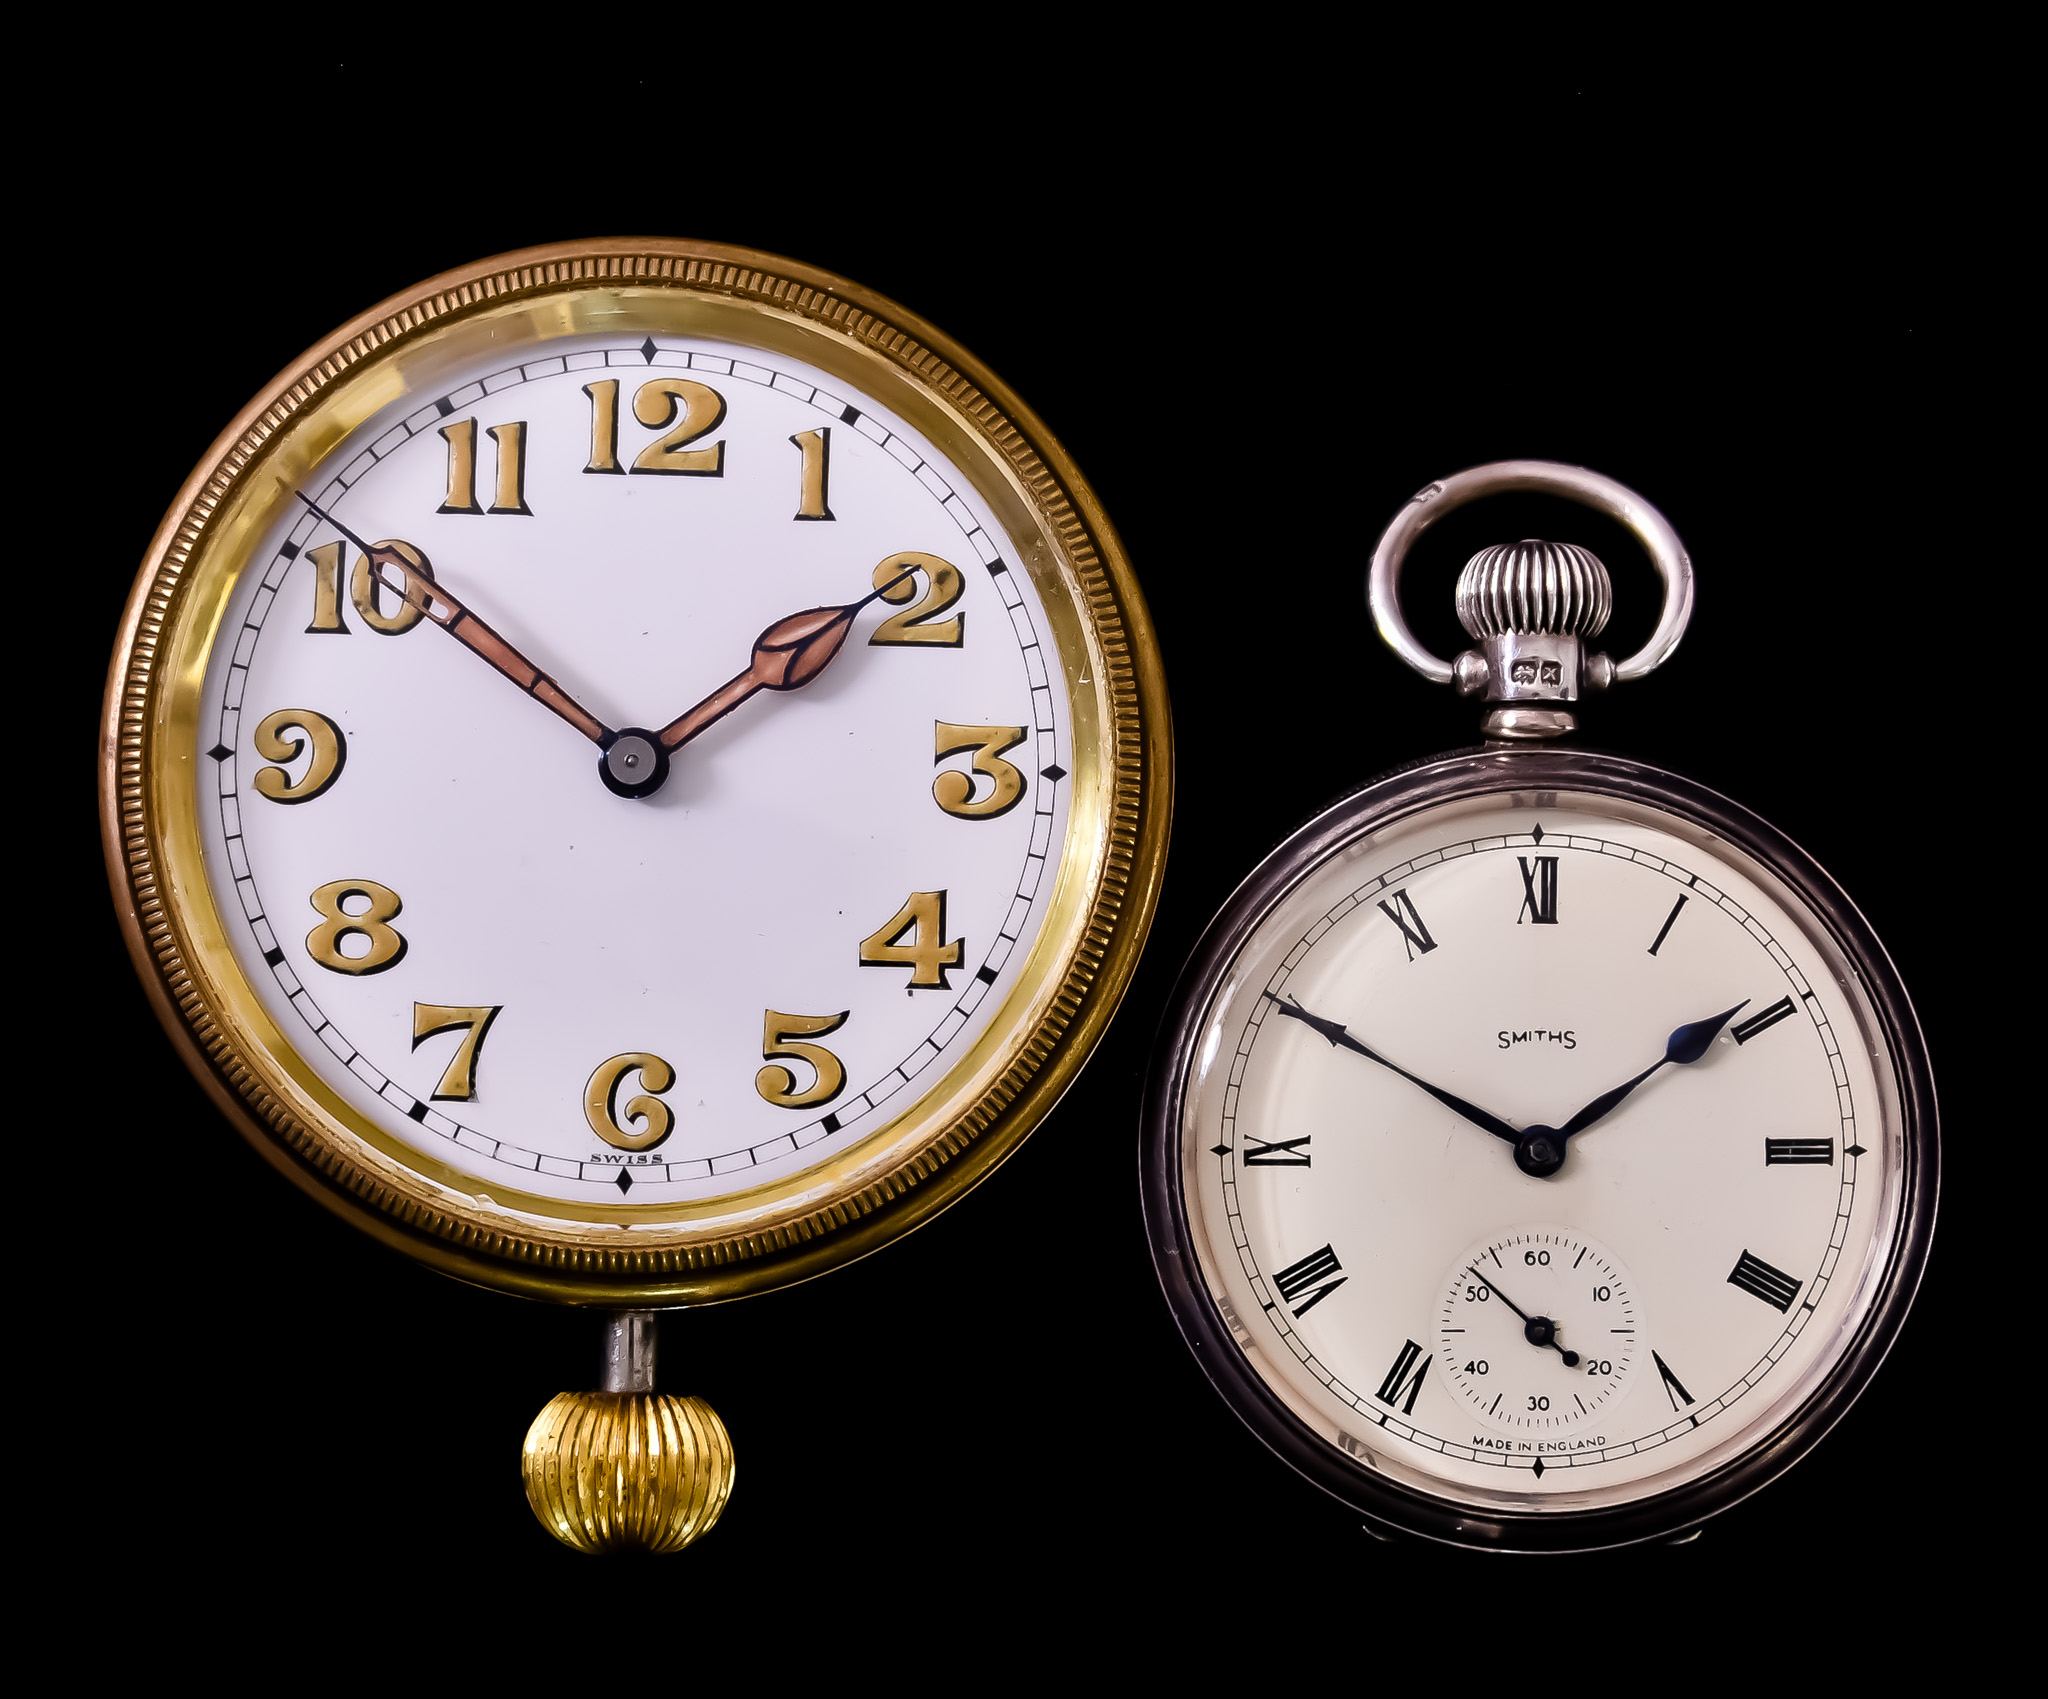 A Motoring Dashboard Clock, Early 20th Century, un-named, 66mm diameter brass and nickel case, white